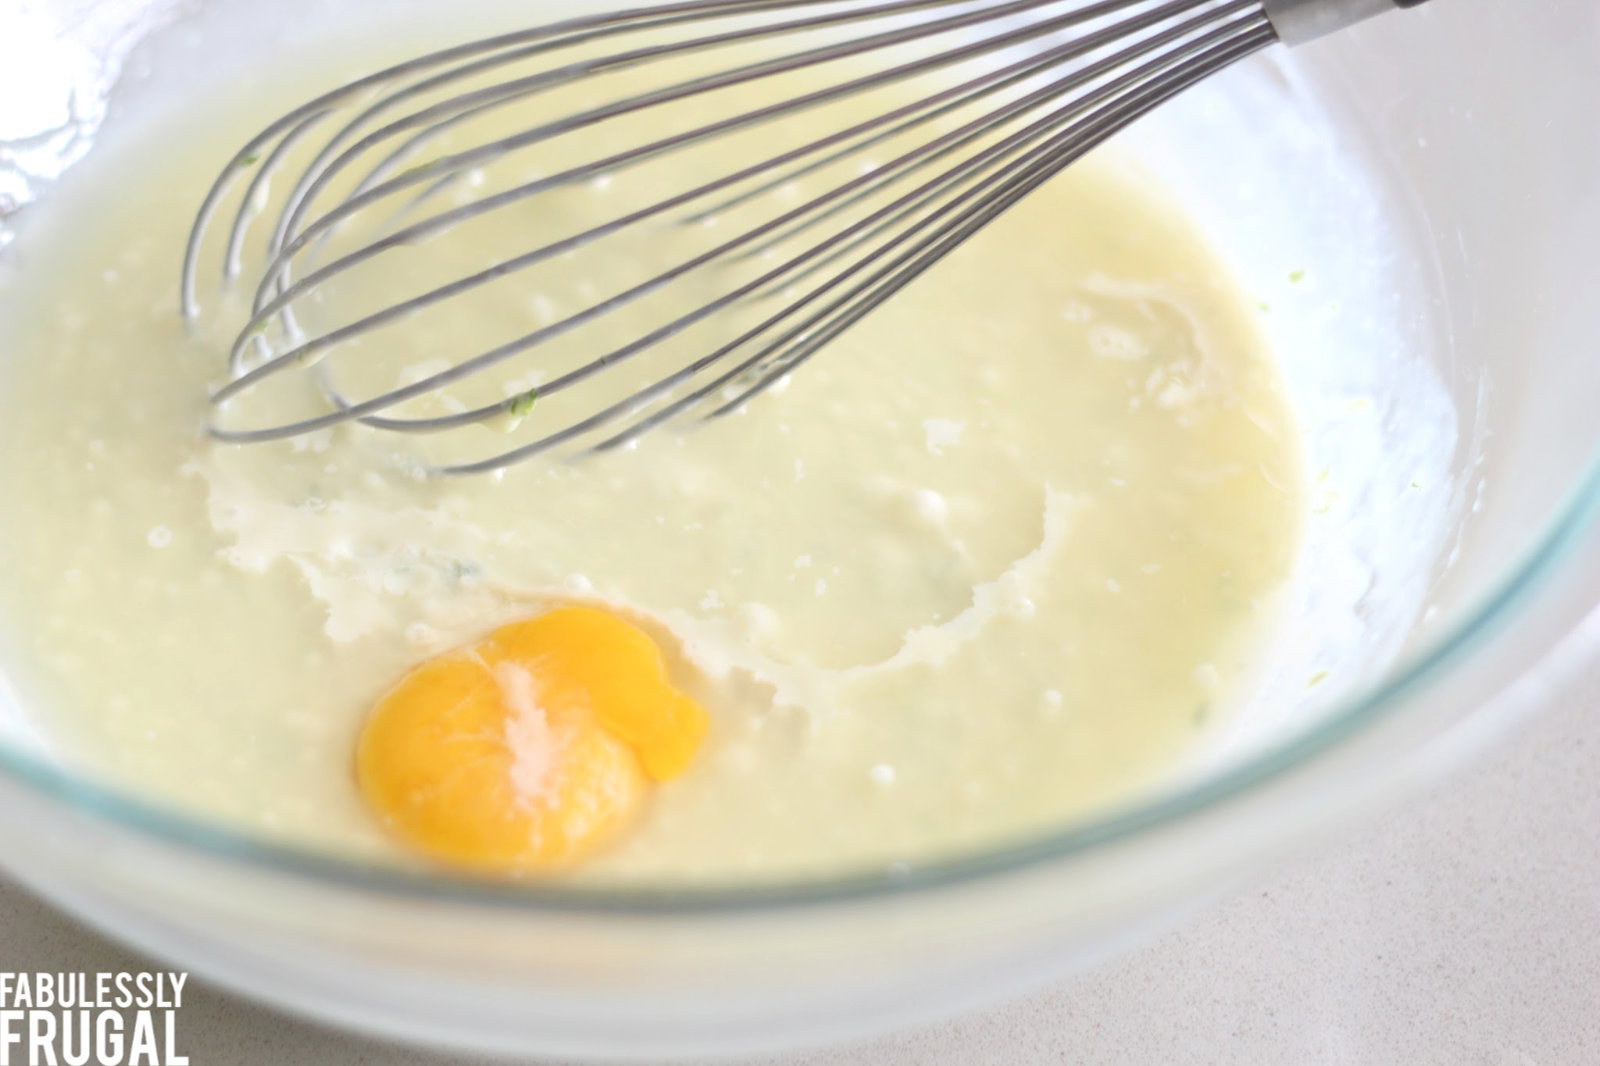 Mixing sweetened condensed milk and egg yolk